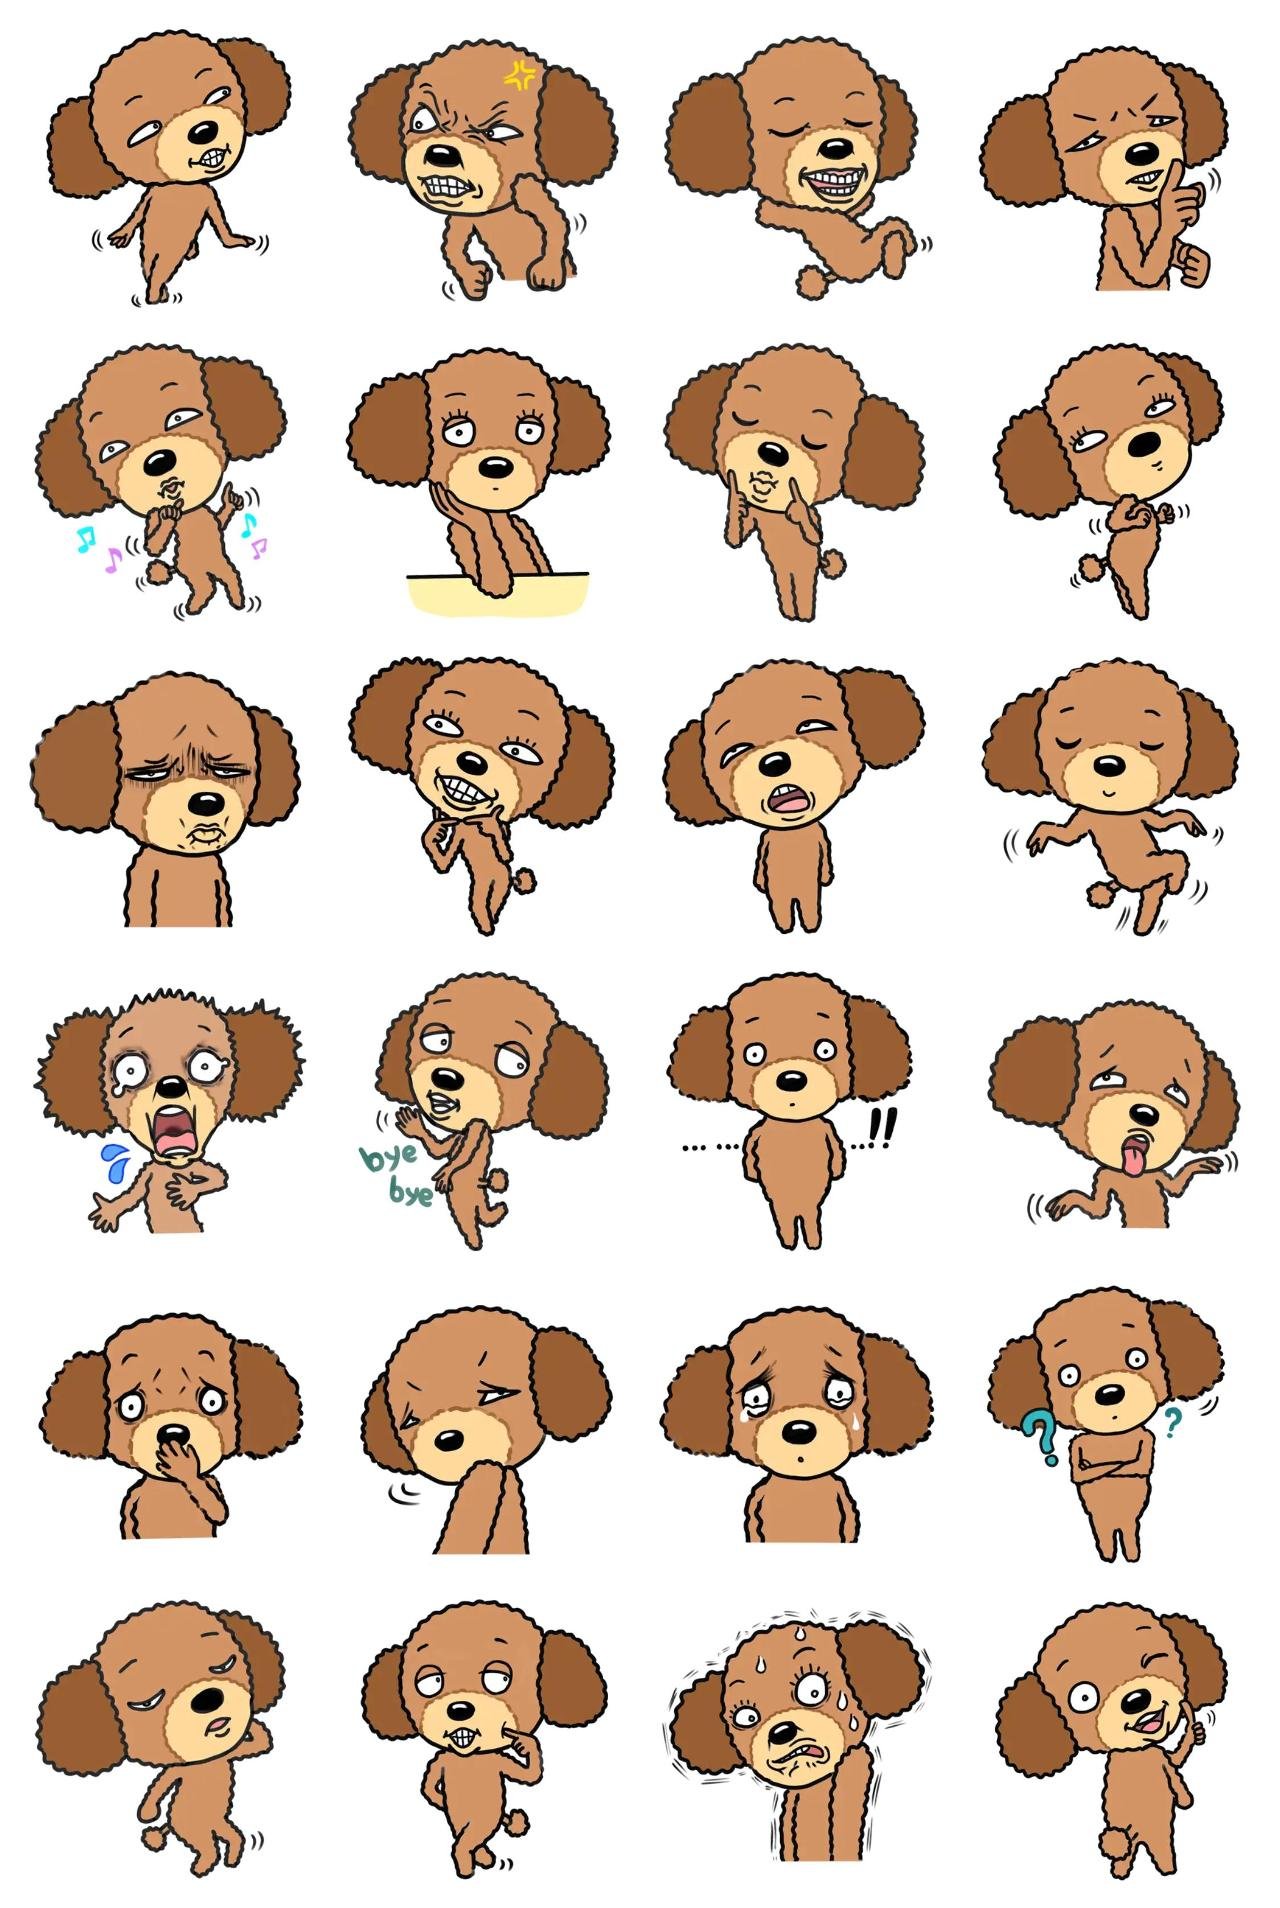 Choco the dog Animals sticker pack for Whatsapp, Telegram, Signal, and others chatting and message apps